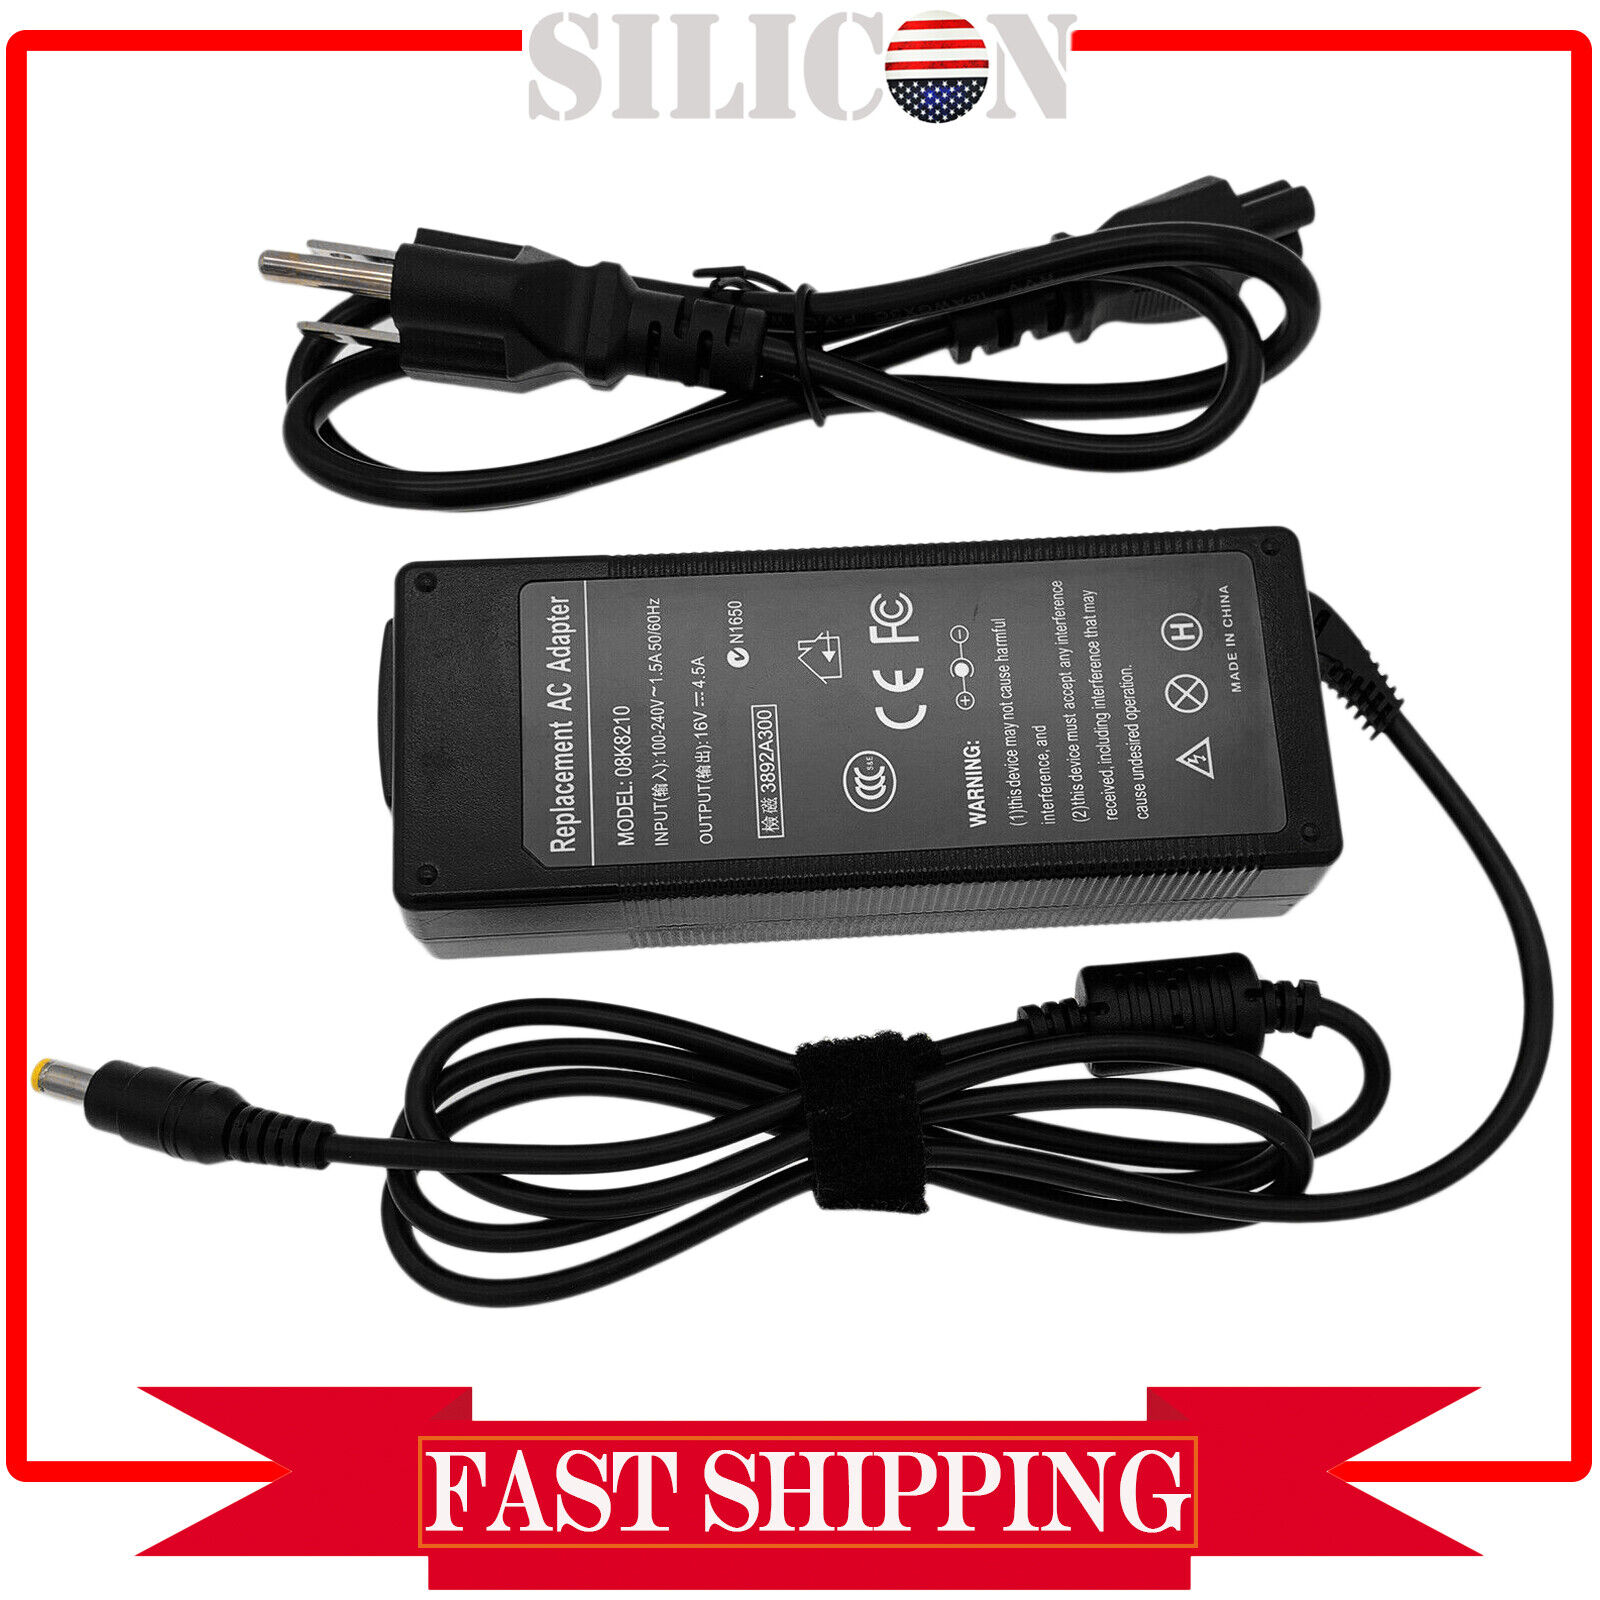 16V 4.5A AC Adapter Charger for Altec Lansing inMotion iM7 Speakers Power Supply